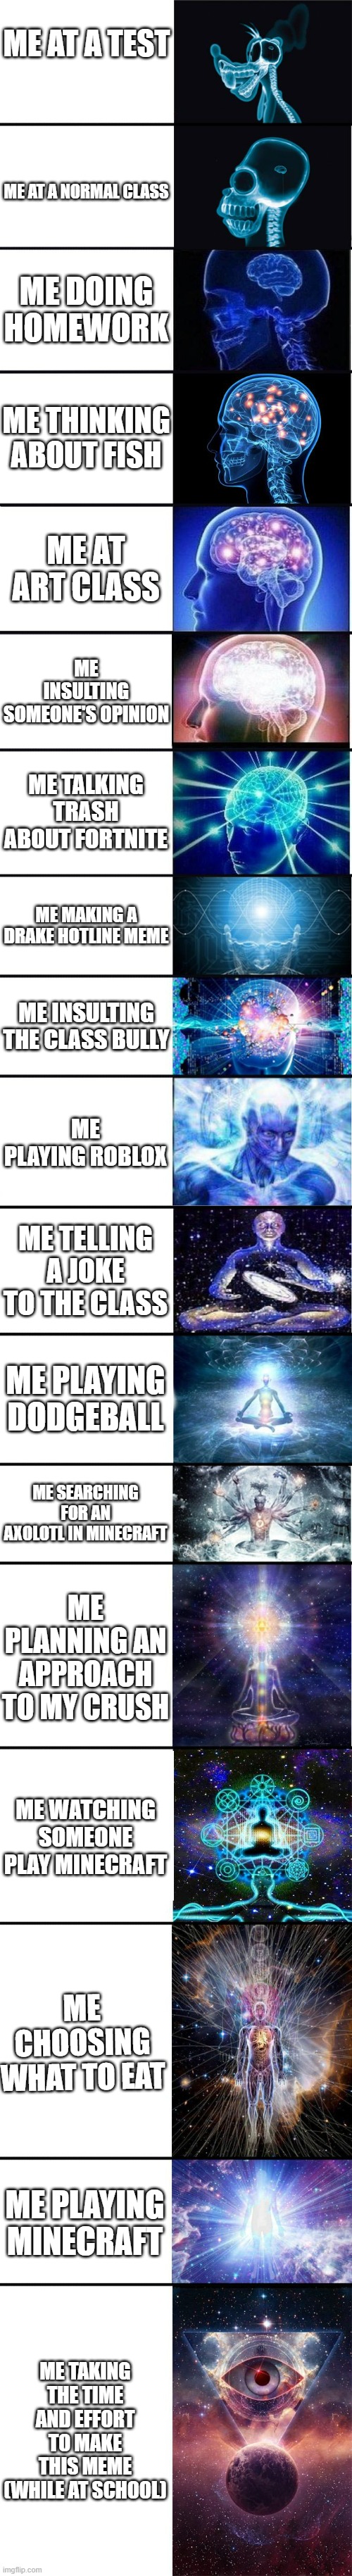 expanding brain: 9001 |  ME AT A TEST; ME AT A NORMAL CLASS; ME DOING HOMEWORK; ME THINKING ABOUT FISH; ME AT ART CLASS; ME INSULTING SOMEONE'S OPINION; ME TALKING TRASH ABOUT FORTNITE; ME MAKING A DRAKE HOTLINE MEME; ME INSULTING THE CLASS BULLY; ME PLAYING ROBLOX; ME TELLING A JOKE TO THE CLASS; ME PLAYING DODGEBALL; ME SEARCHING FOR AN AXOLOTL IN MINECRAFT; ME PLANNING AN APPROACH TO MY CRUSH; ME WATCHING SOMEONE PLAY MINECRAFT; ME CHOOSING WHAT TO EAT; ME PLAYING MINECRAFT; ME TAKING THE TIME AND EFFORT TO MAKE THIS MEME (WHILE AT SCHOOL) | image tagged in expanding brain 9001 | made w/ Imgflip meme maker